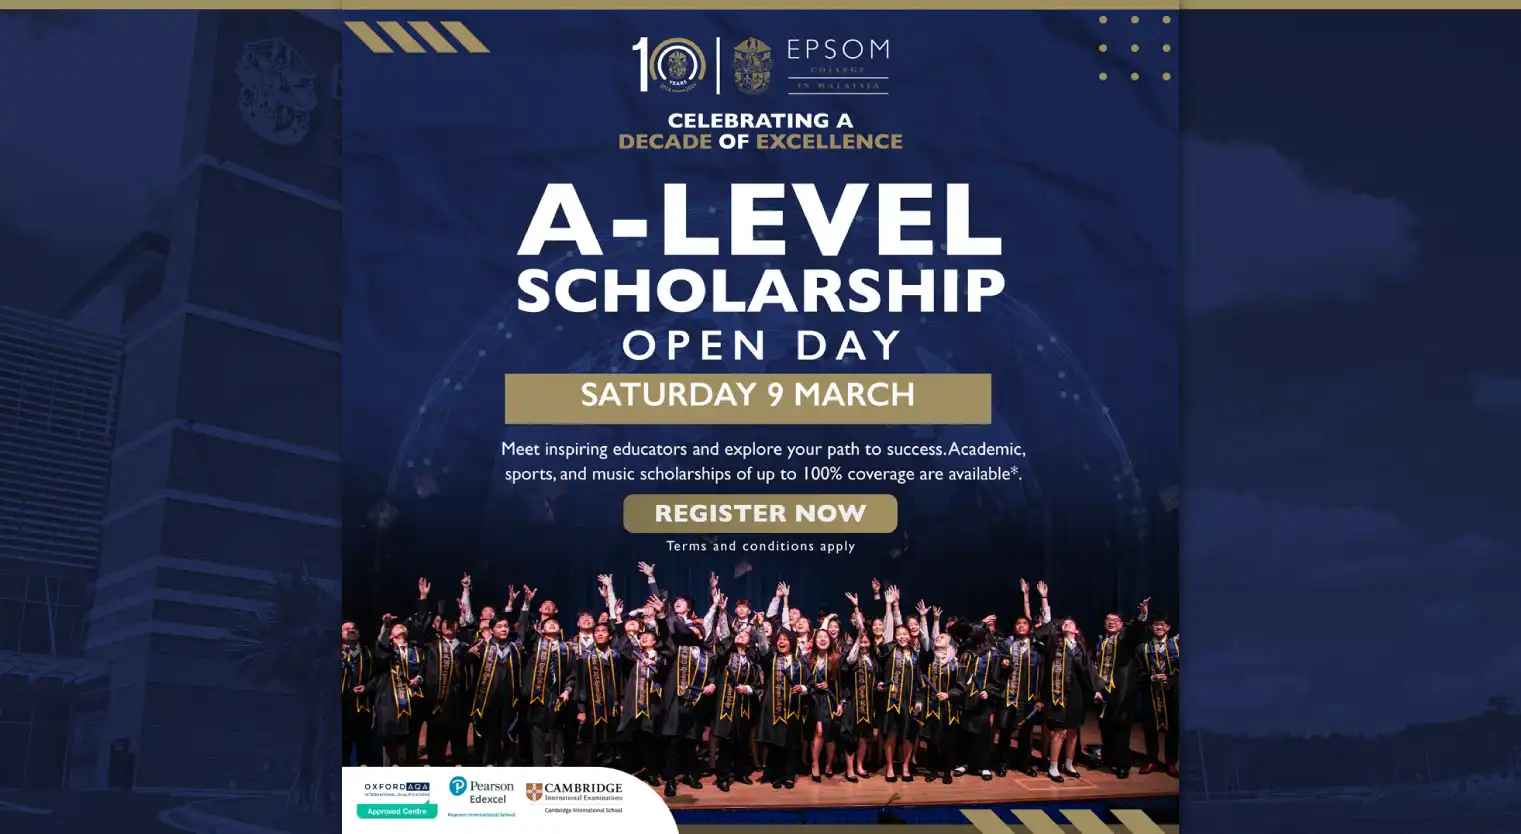 epsom-college-malaysia-a-level-scholarship-open-day